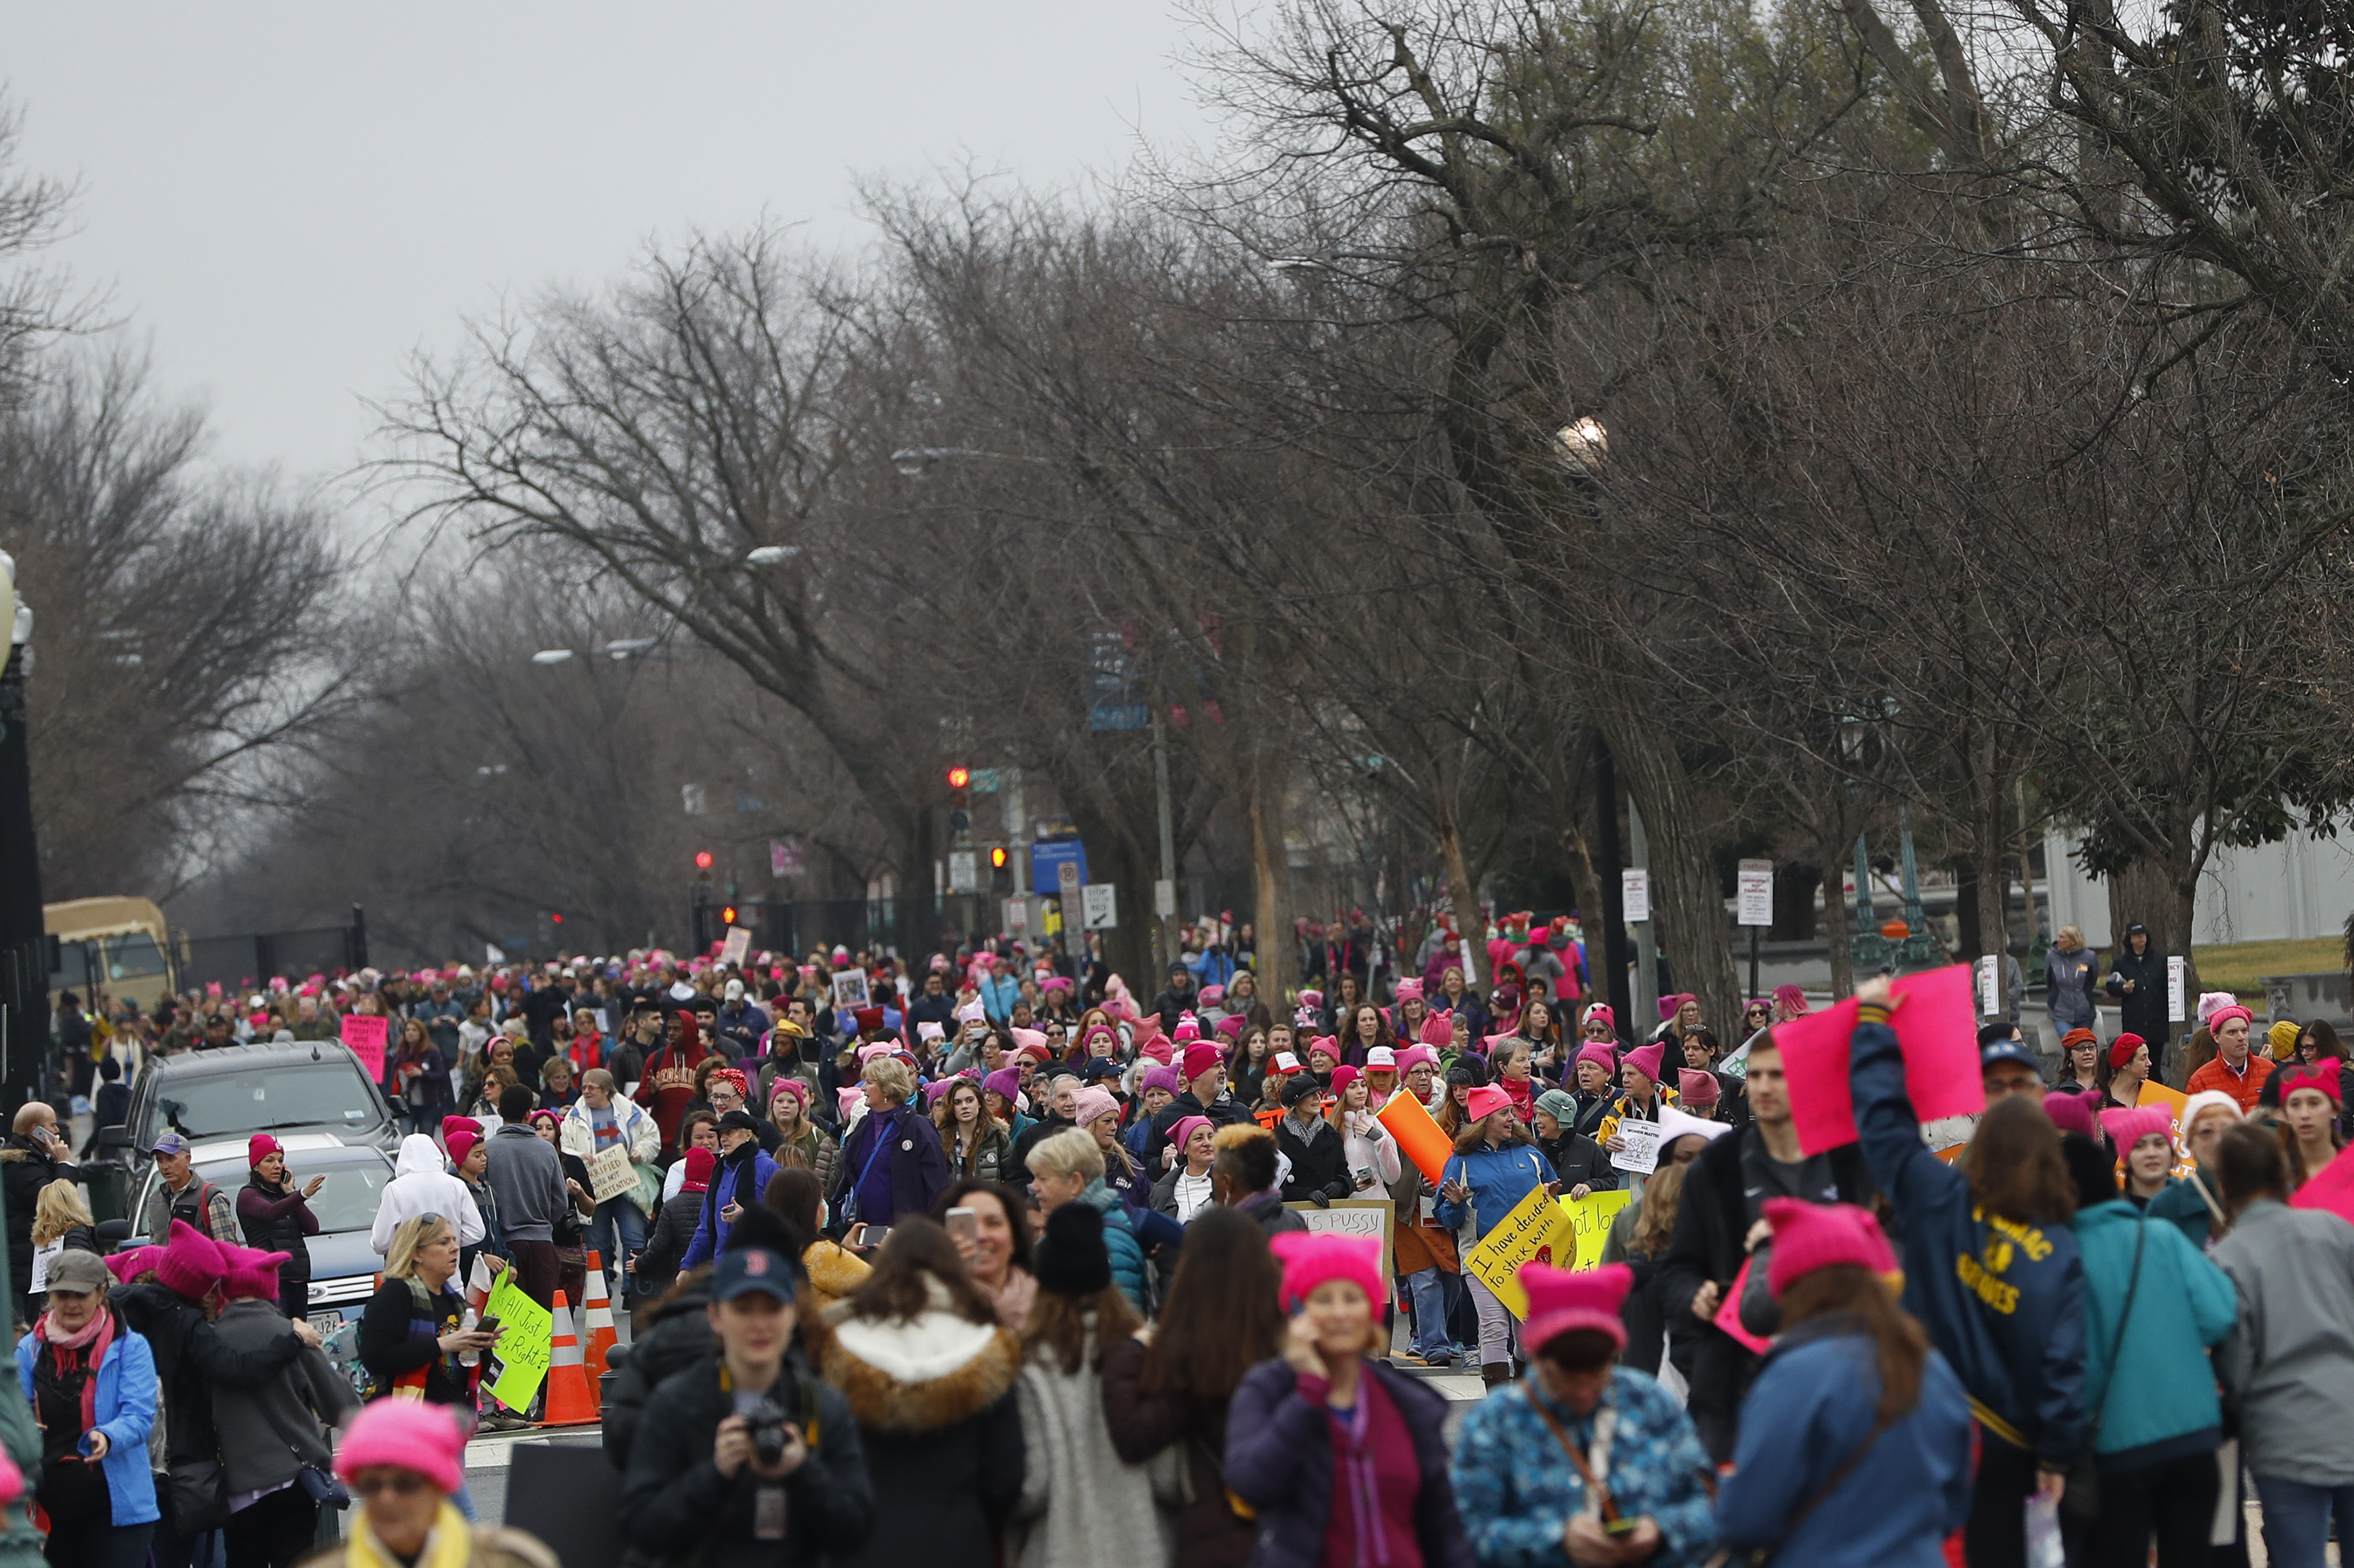 Protesters gather during the Women's March on Washington January 21, 2017 in Washington, DC. The march is expected to draw thousands from across the country to protest newly inaugurated President Donald Trump. Aaron P. Bernstein&mdash;Getty Images (Aaron P. Bernstein&mdash;Getty Images)